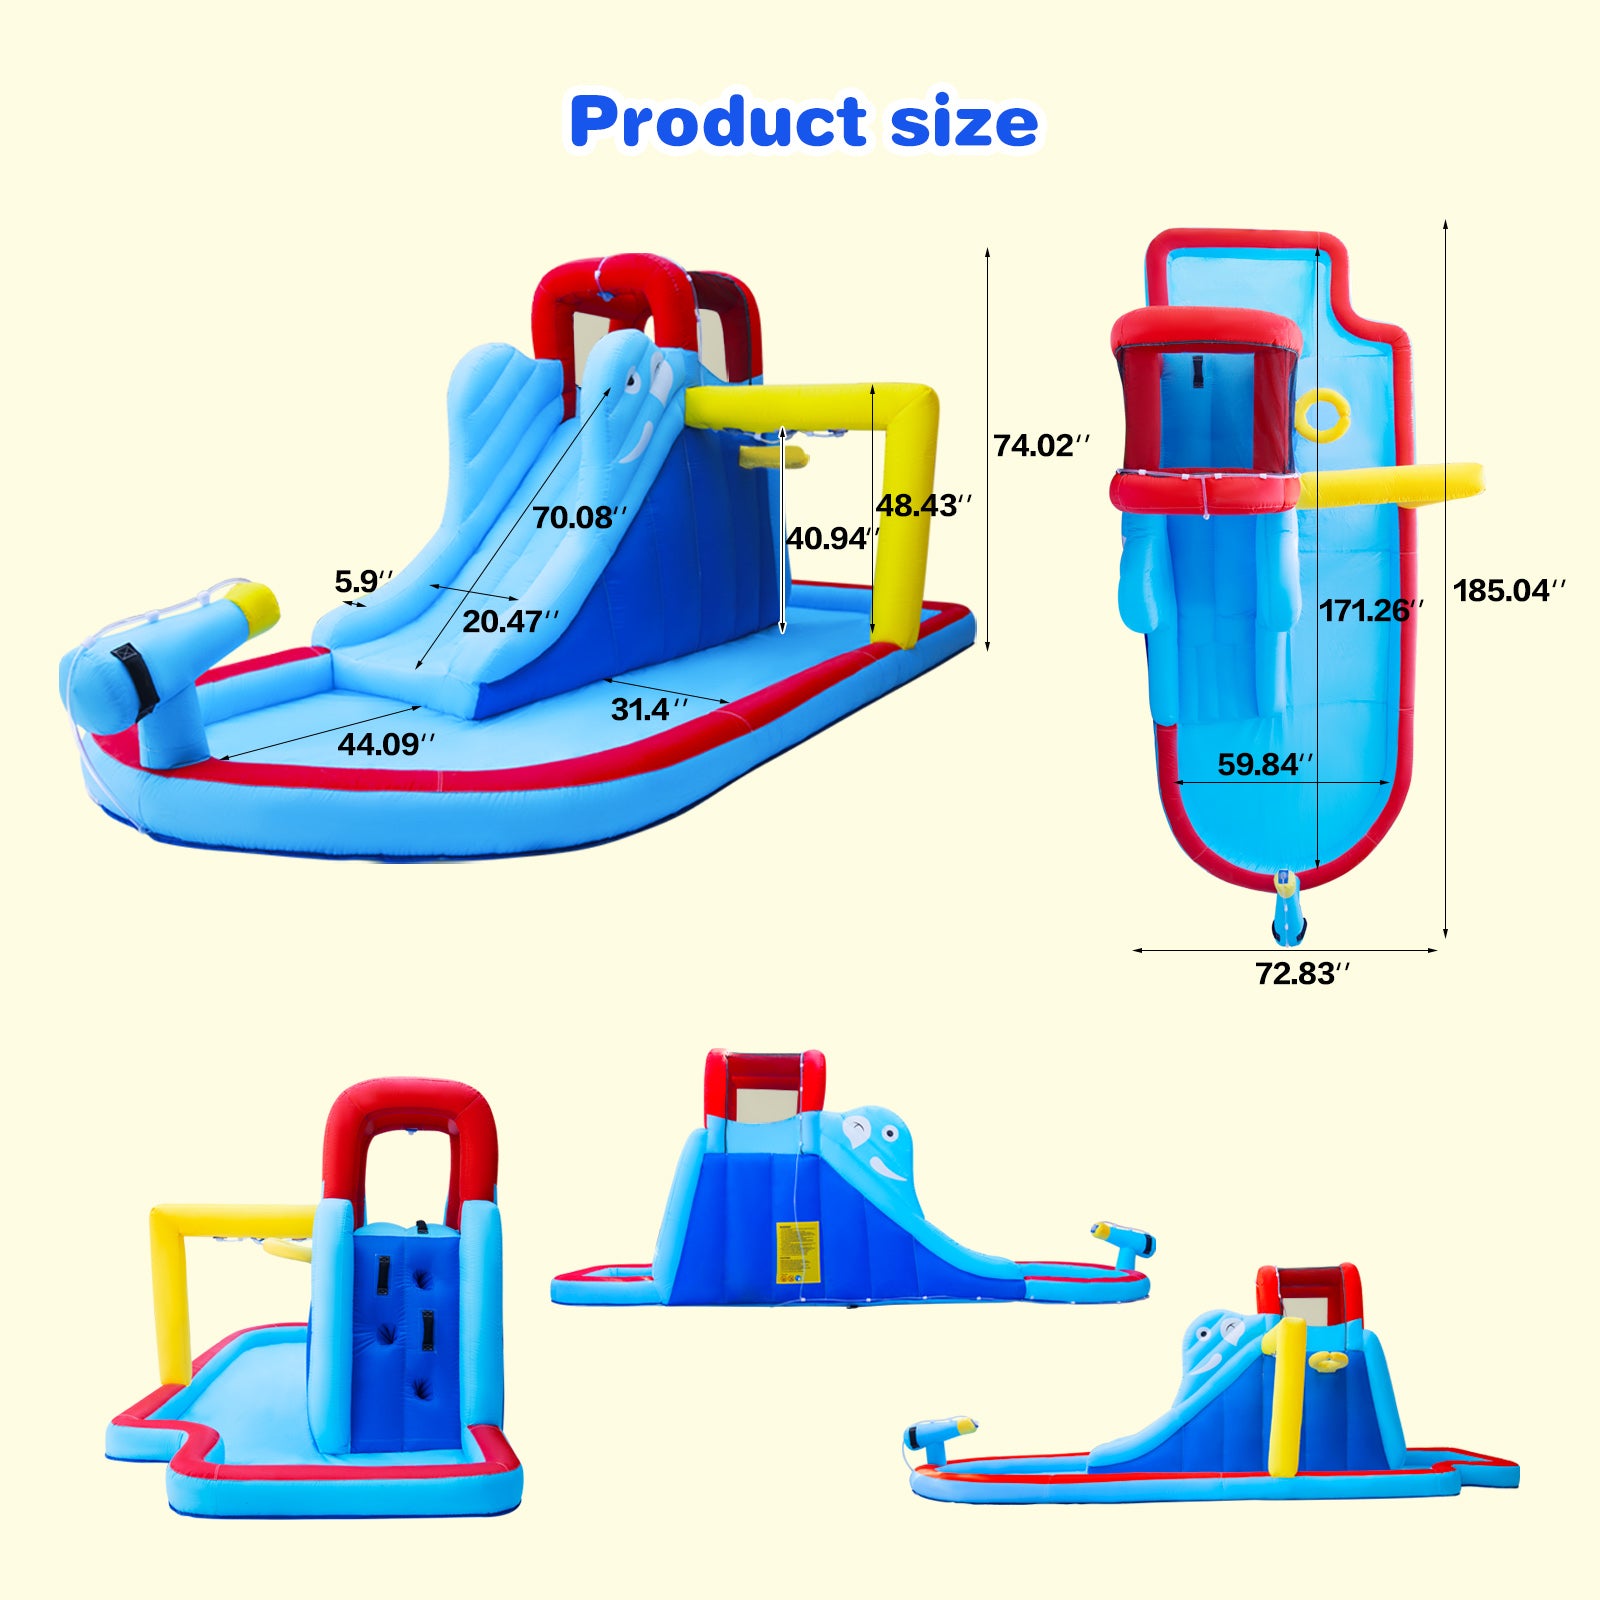 #1202 Inflatable Bounce House, Water Slide Bouncer Playhouse Castle w/Splash Pool, Climbing Wall, Basketball Hoop & Carry Bag, 480W Air Blower for Kids Backyard Indoor Outdoor Use, Free Water Gun